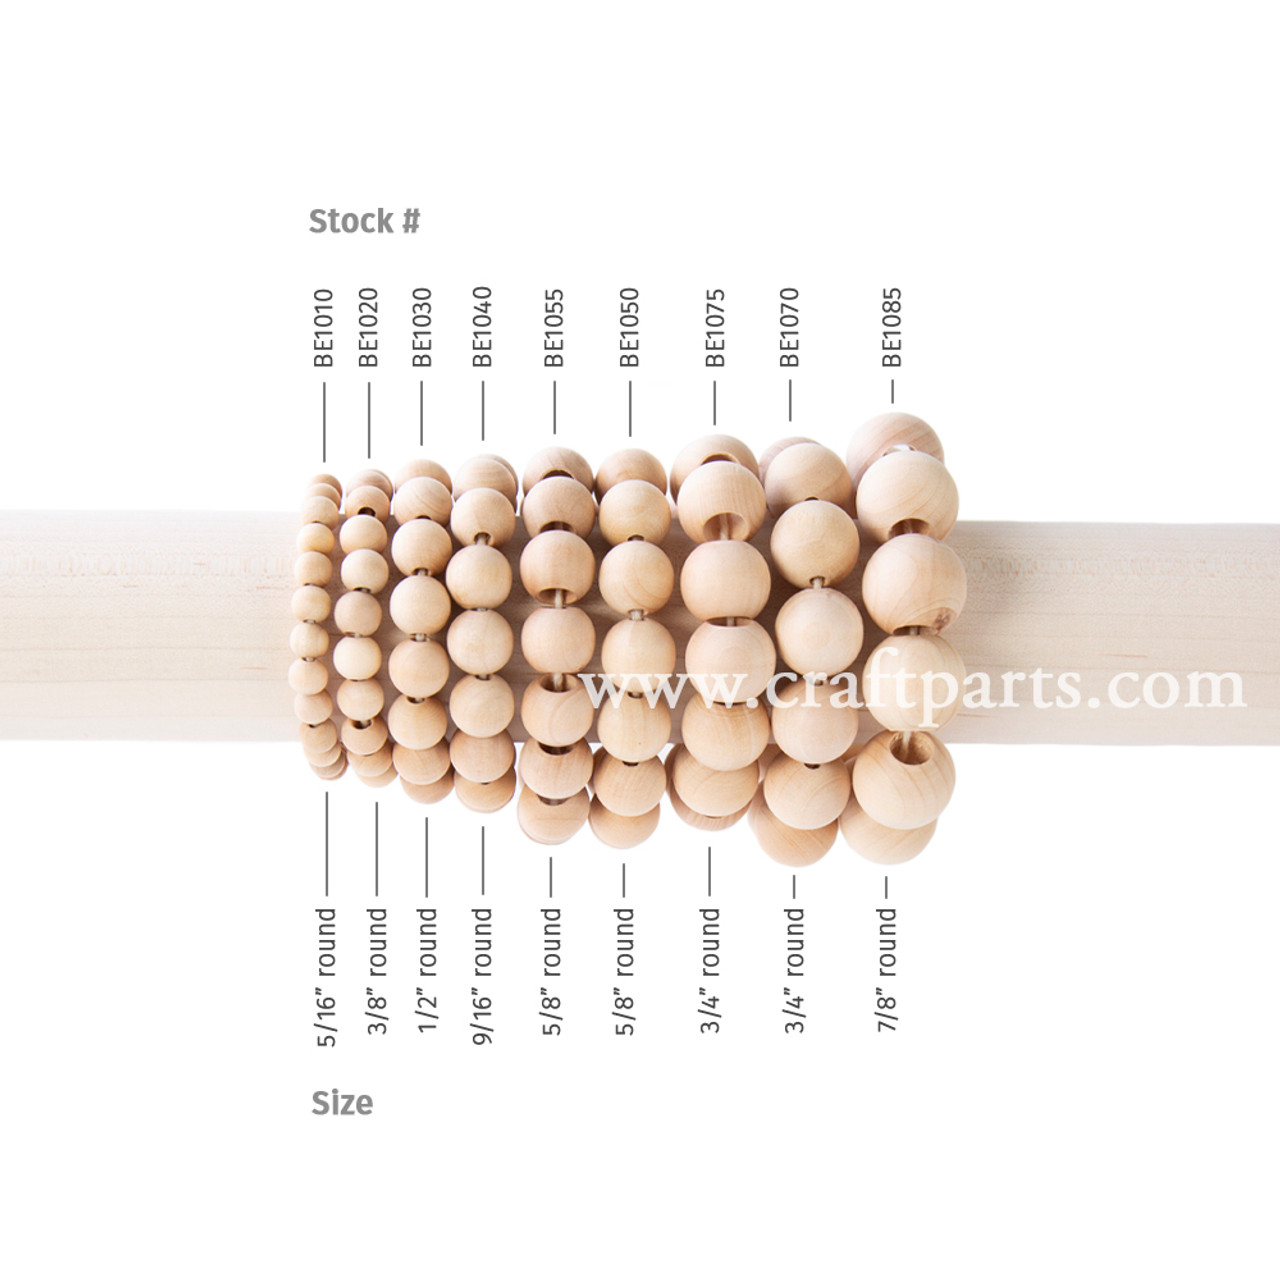 20mm Wooden Beads - 8 Pieces